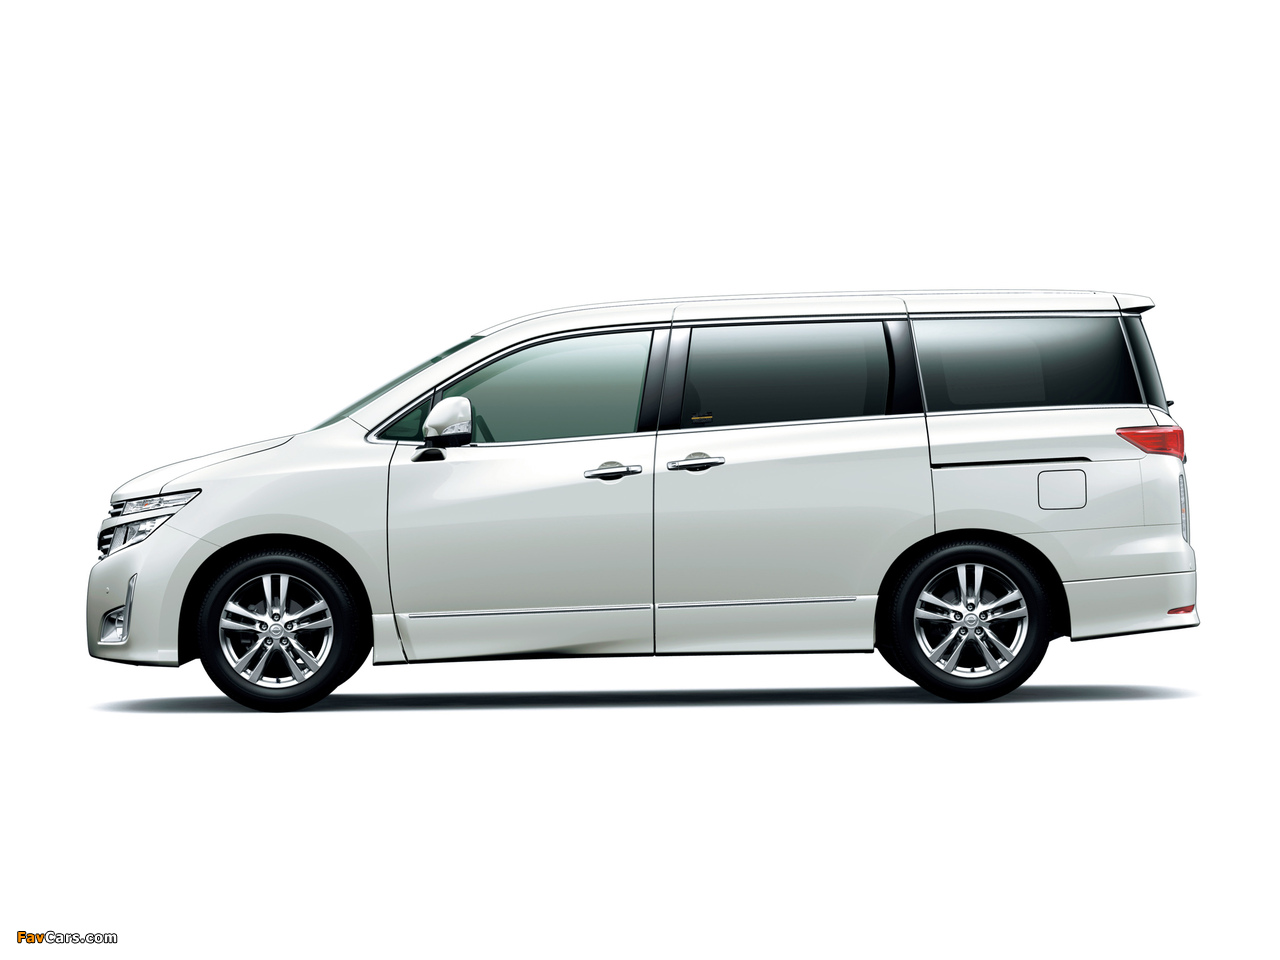 Nissan Elgrand Highway Star (E52) 2010 images (1280 x 960)